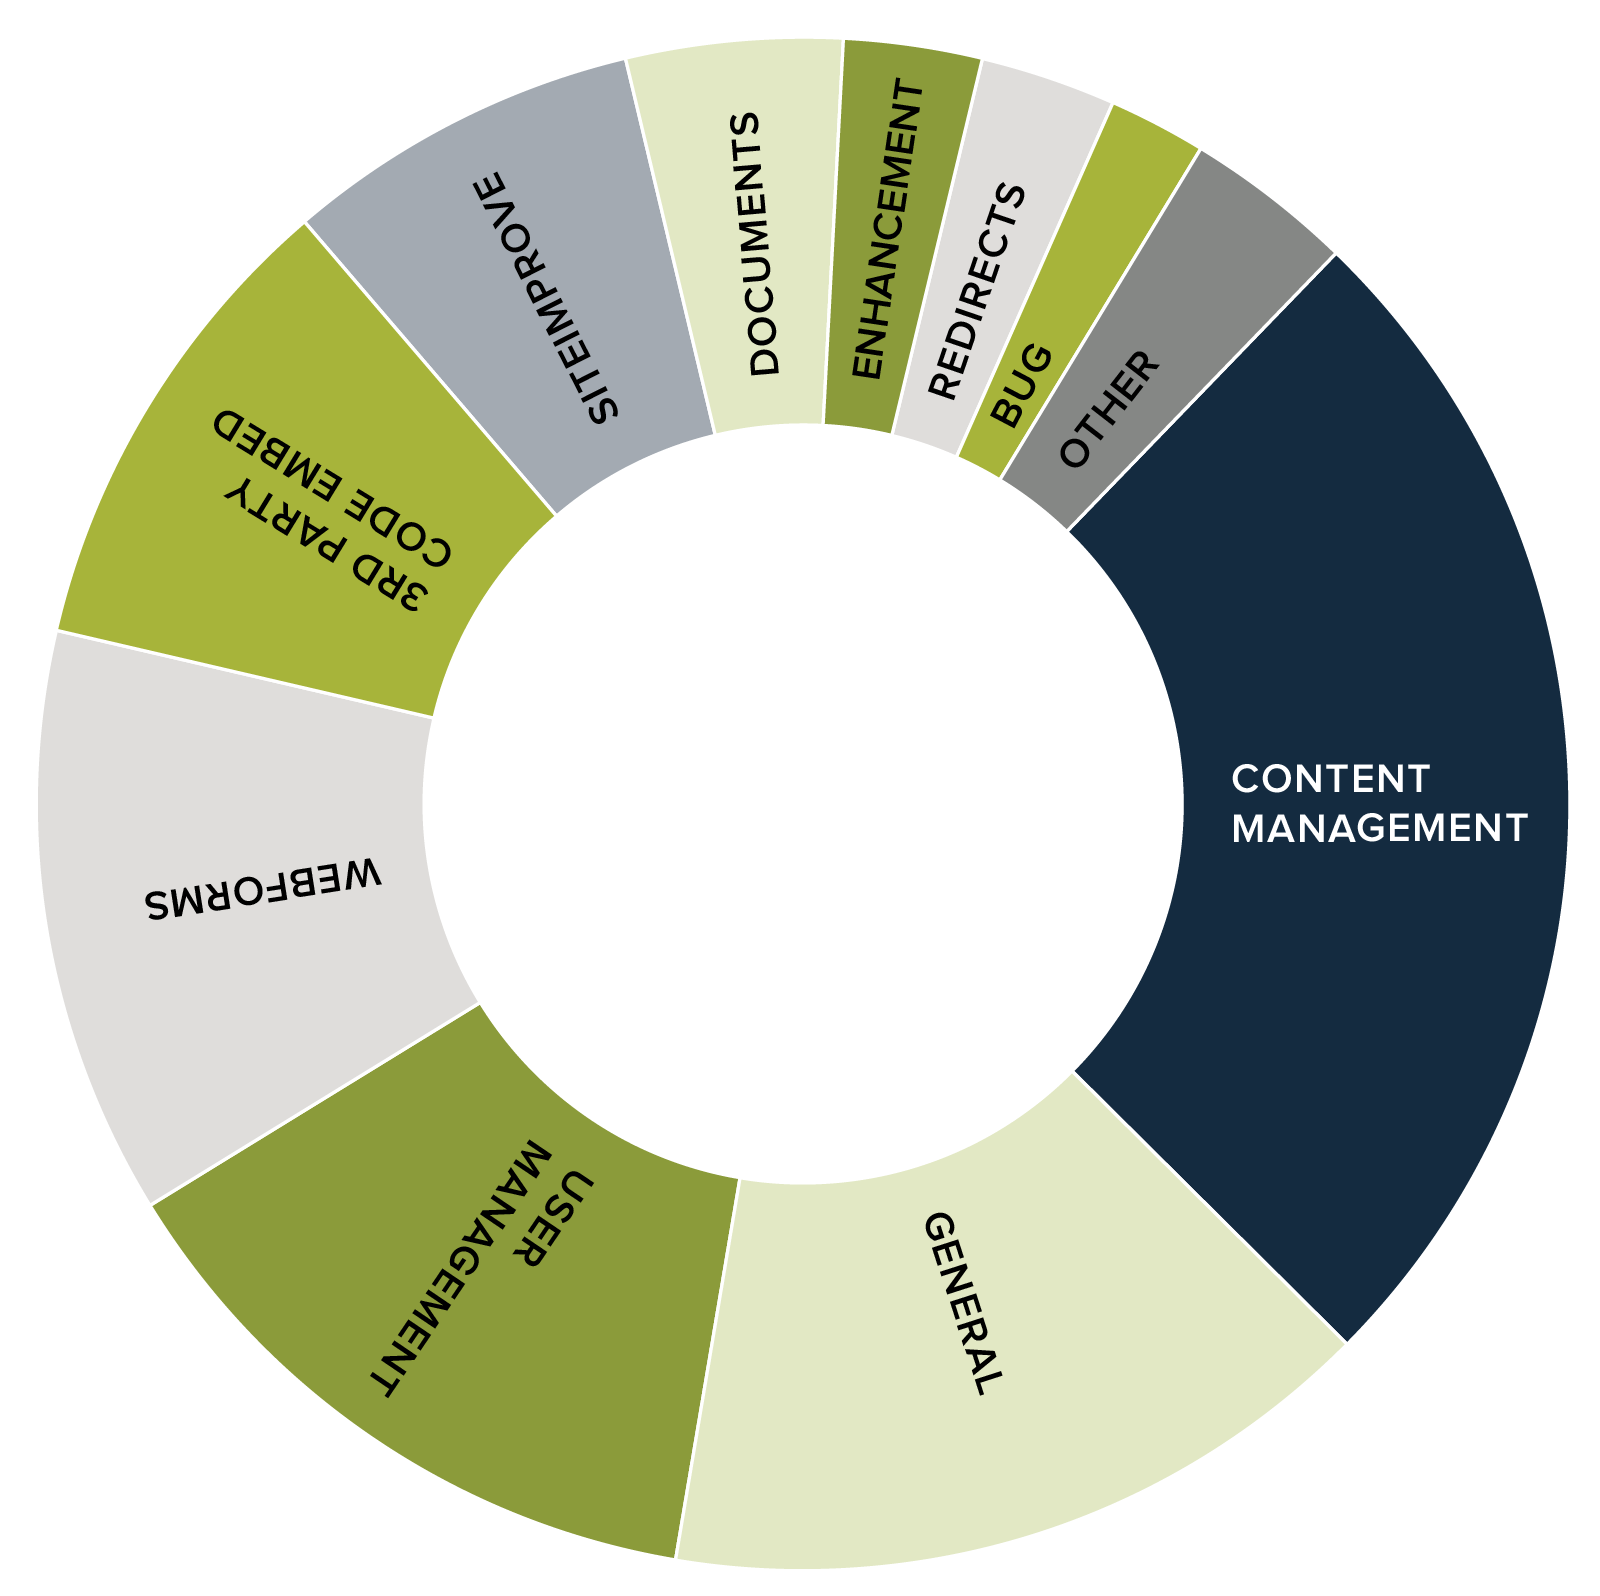 A pie chart showing several topics. In order from largest to smallest: Content Management, General, User Management, Webforms, 3rd Party Code Embed, Siteimprove, Documents, Other, Enhancement, Redirects, Bug.